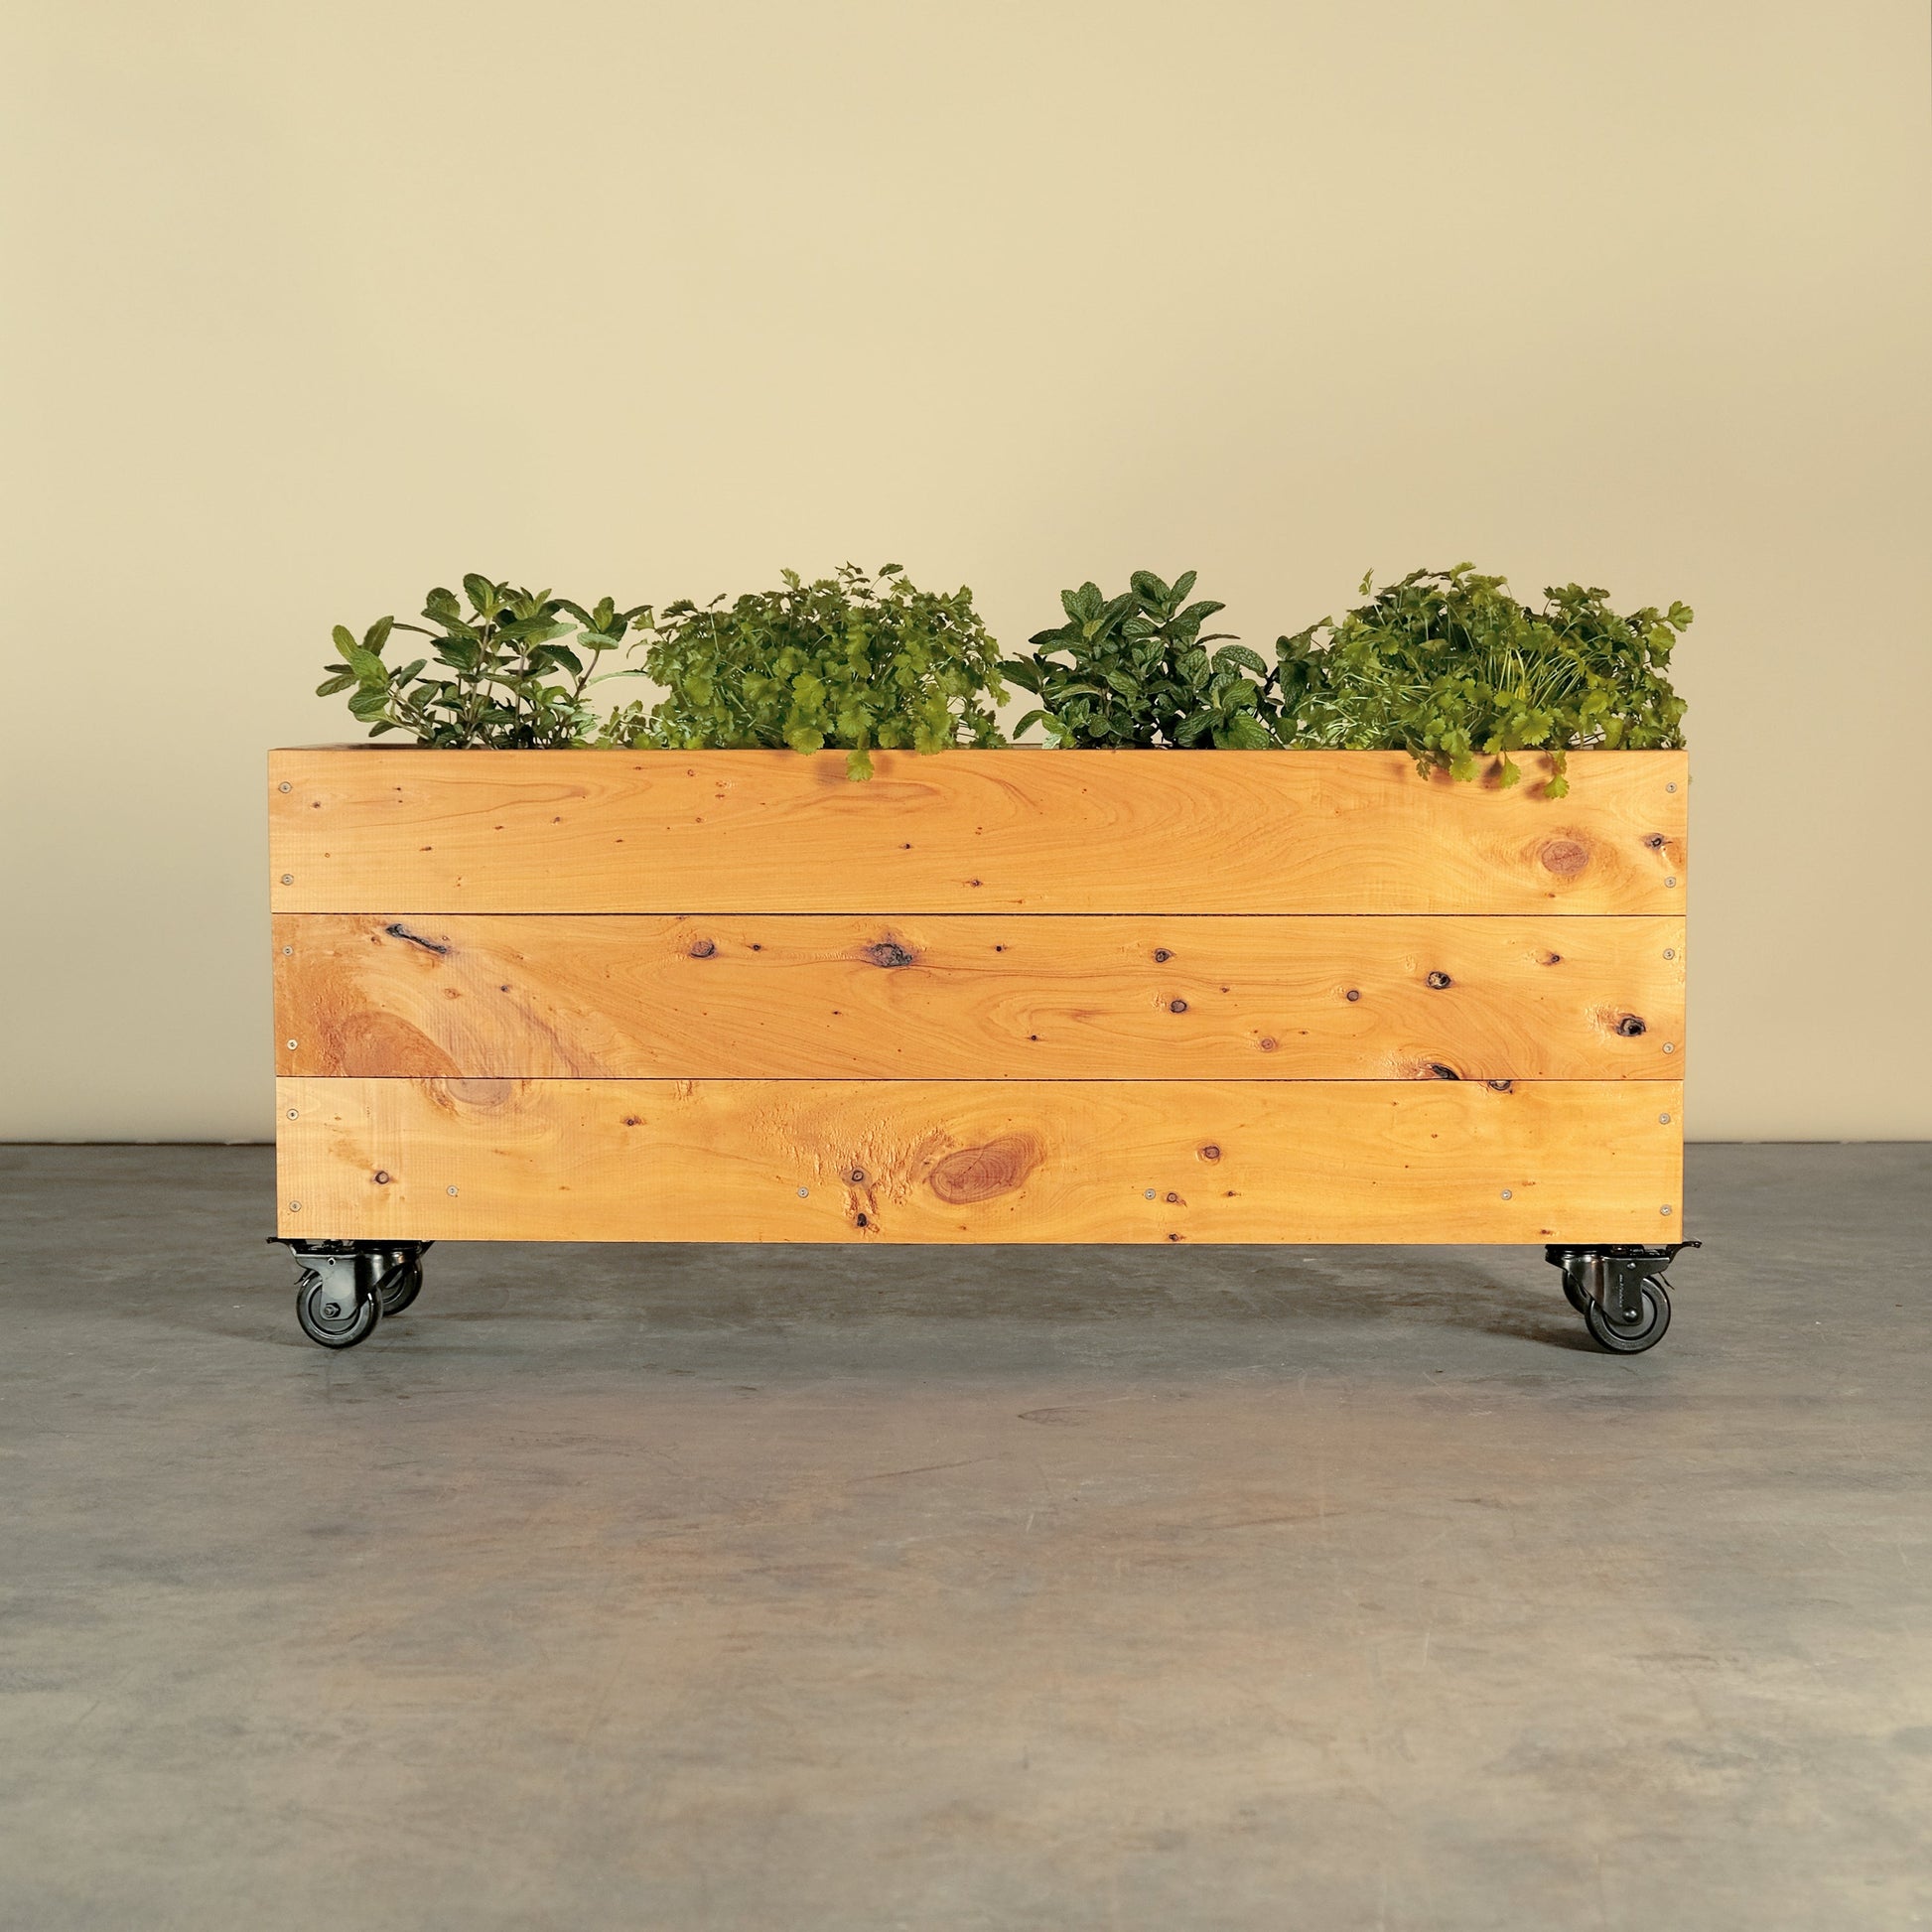 Cypress garden box on locking wheels. Planted with fresh herbs basil and coriander. Don’t worry about what to line a planter box, ours are already lined with a drainage liner. Ready for planting and in stock!